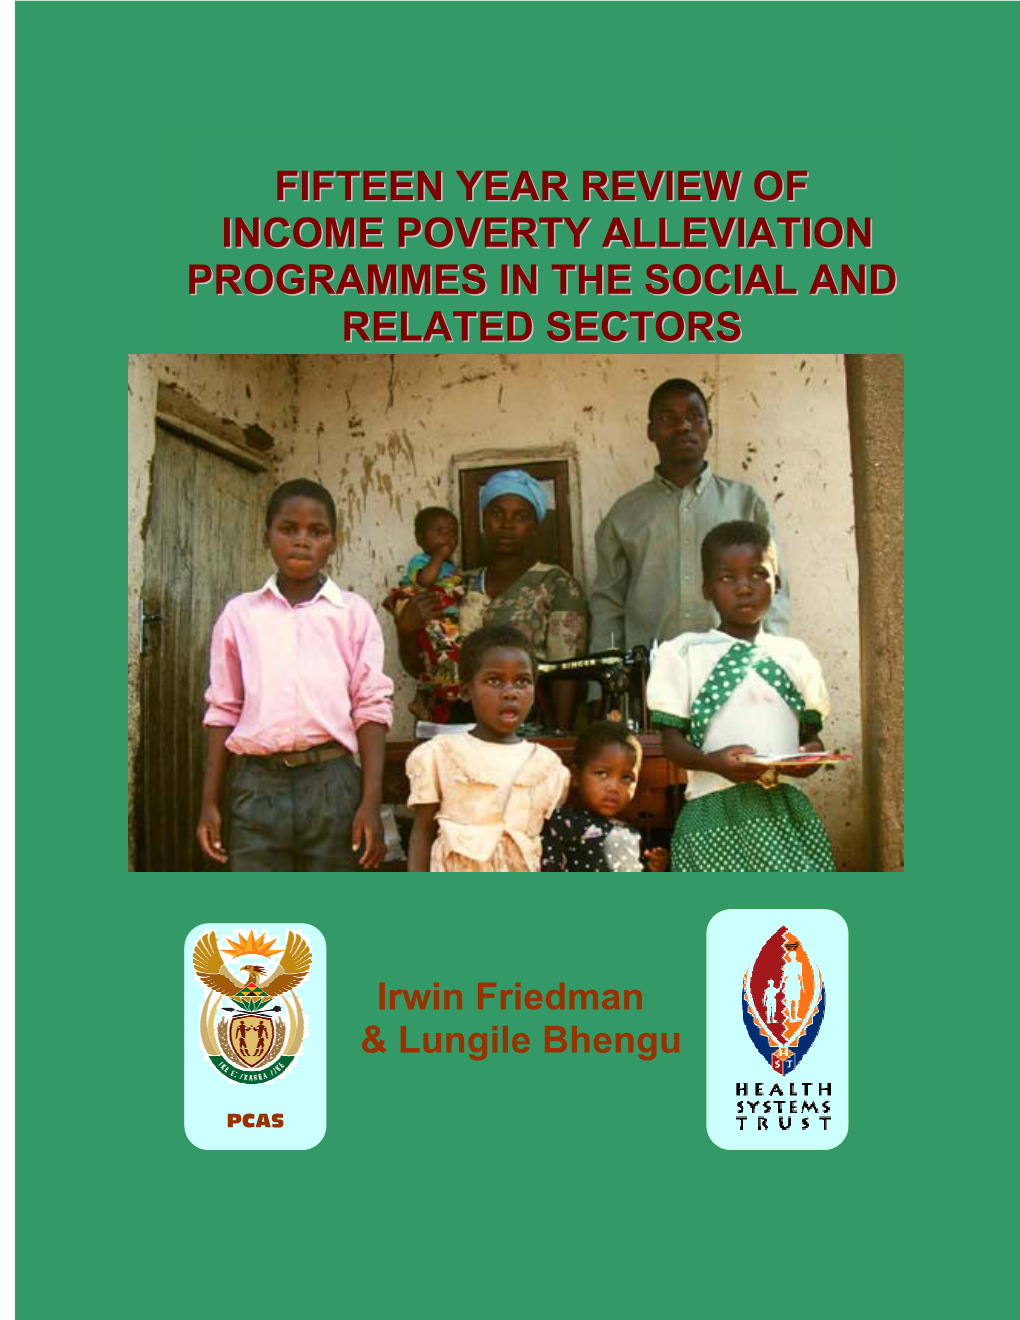 Fifteen Year Review of Income Poverty Alleviation Programmes in the Social and Related Sectors Full Final Report